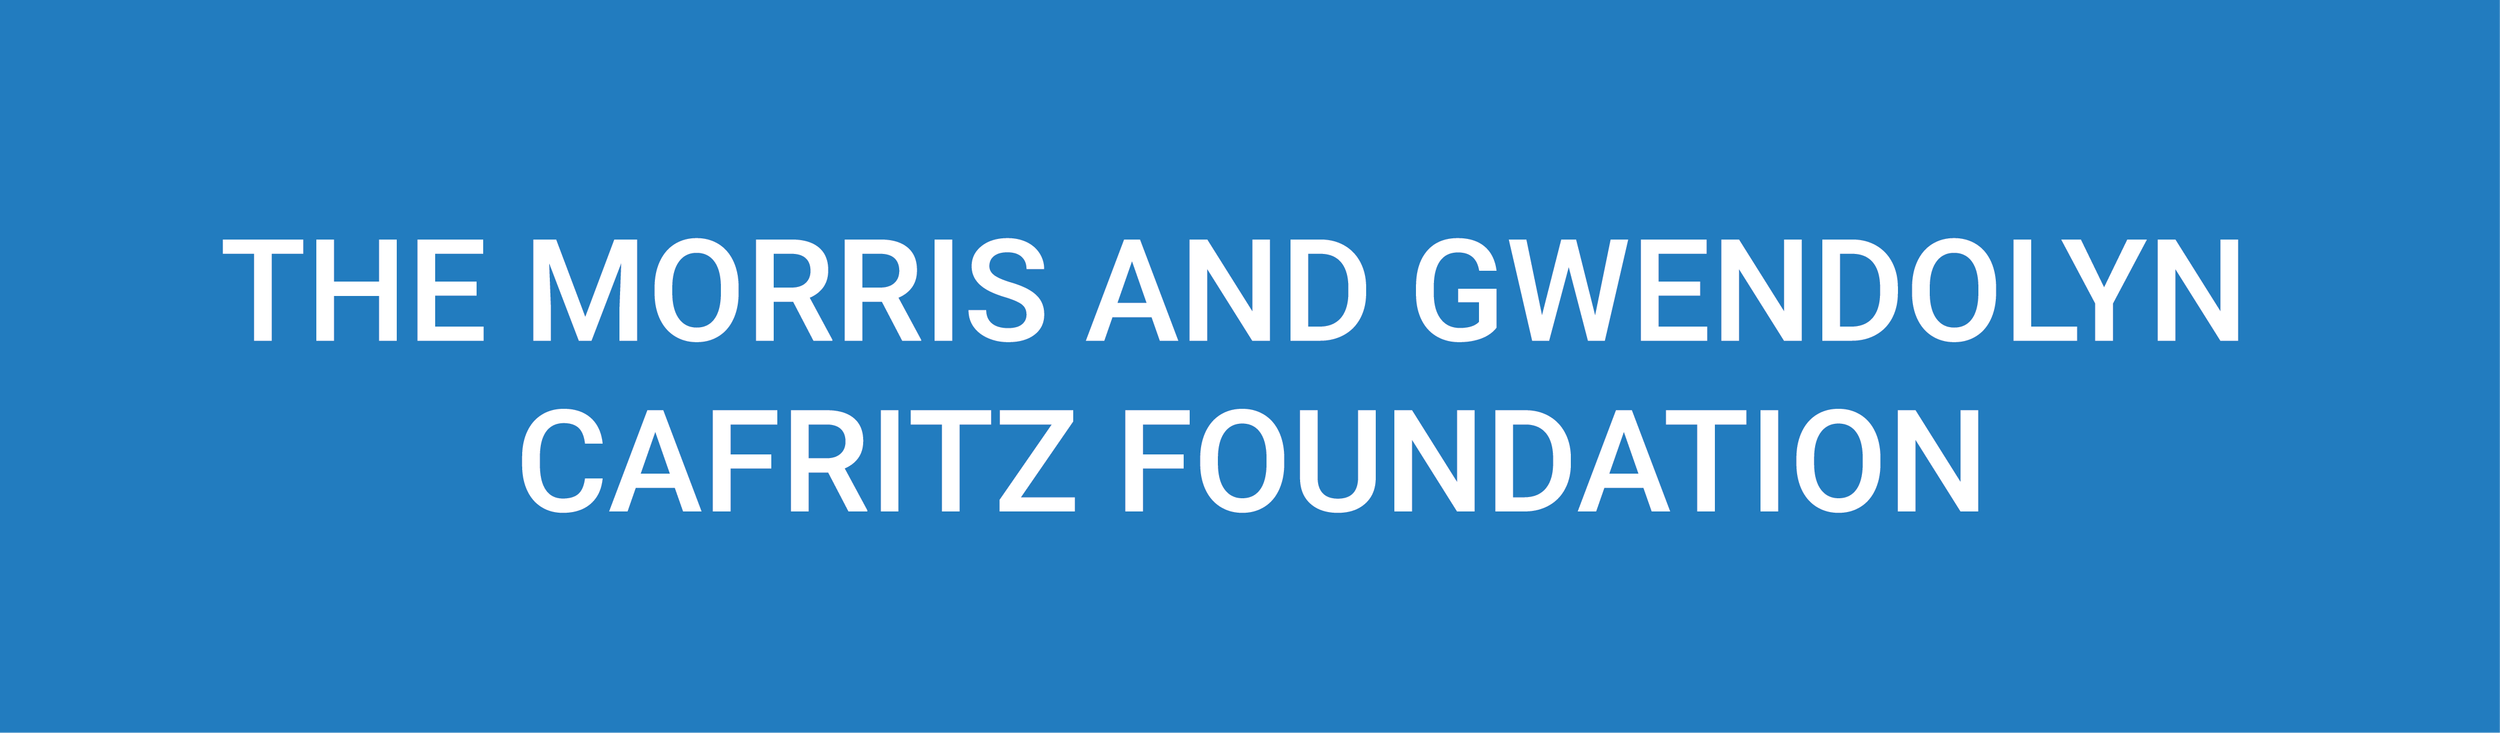 The-Morris-and-Gwendolyn-Cafritz-Foundation-Primary-Logo-light-blue-background.png